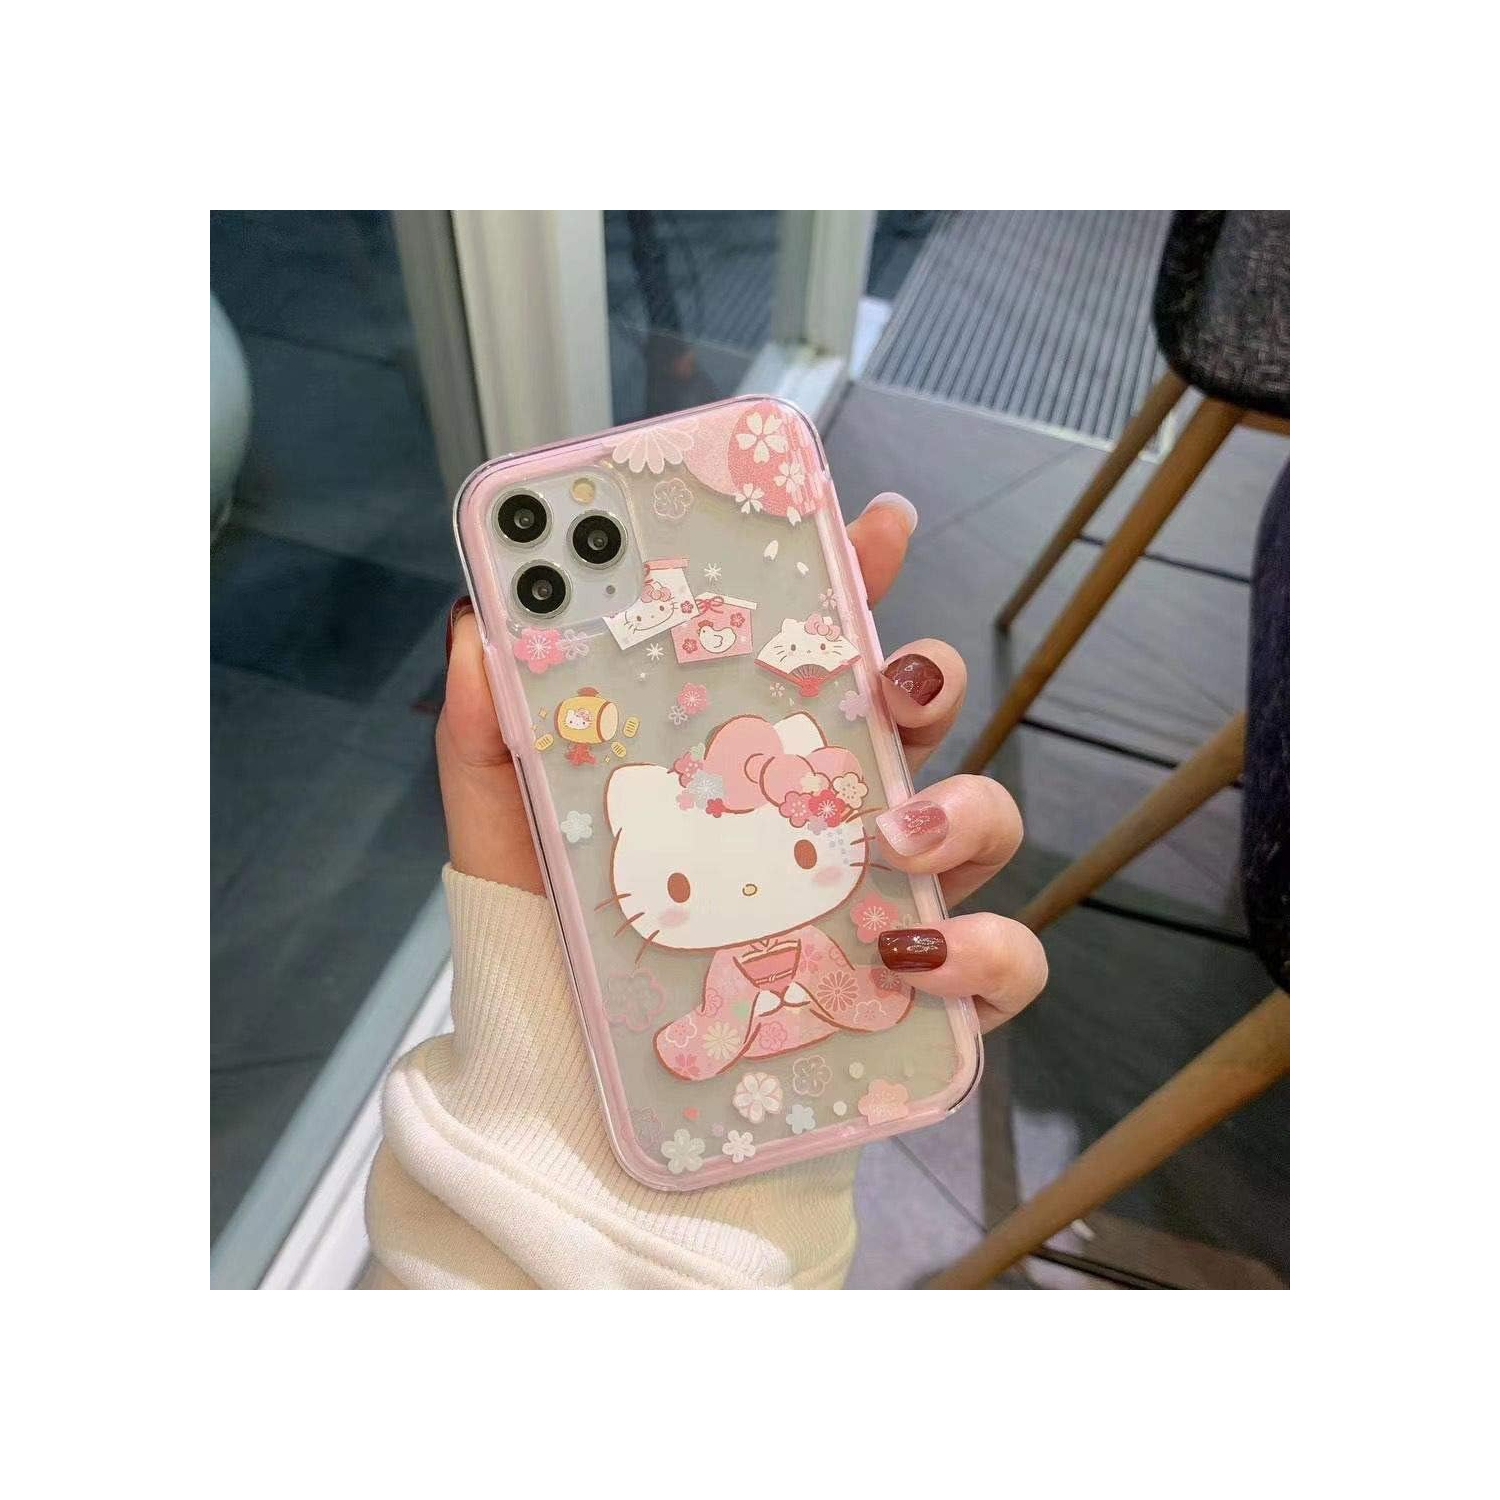 iPhone 11 Hello Kitty Case,Cute Cartoon Hello Kitty Case Cover Shockproof Bumper Case (Pink,for iPhone 11-6.1")